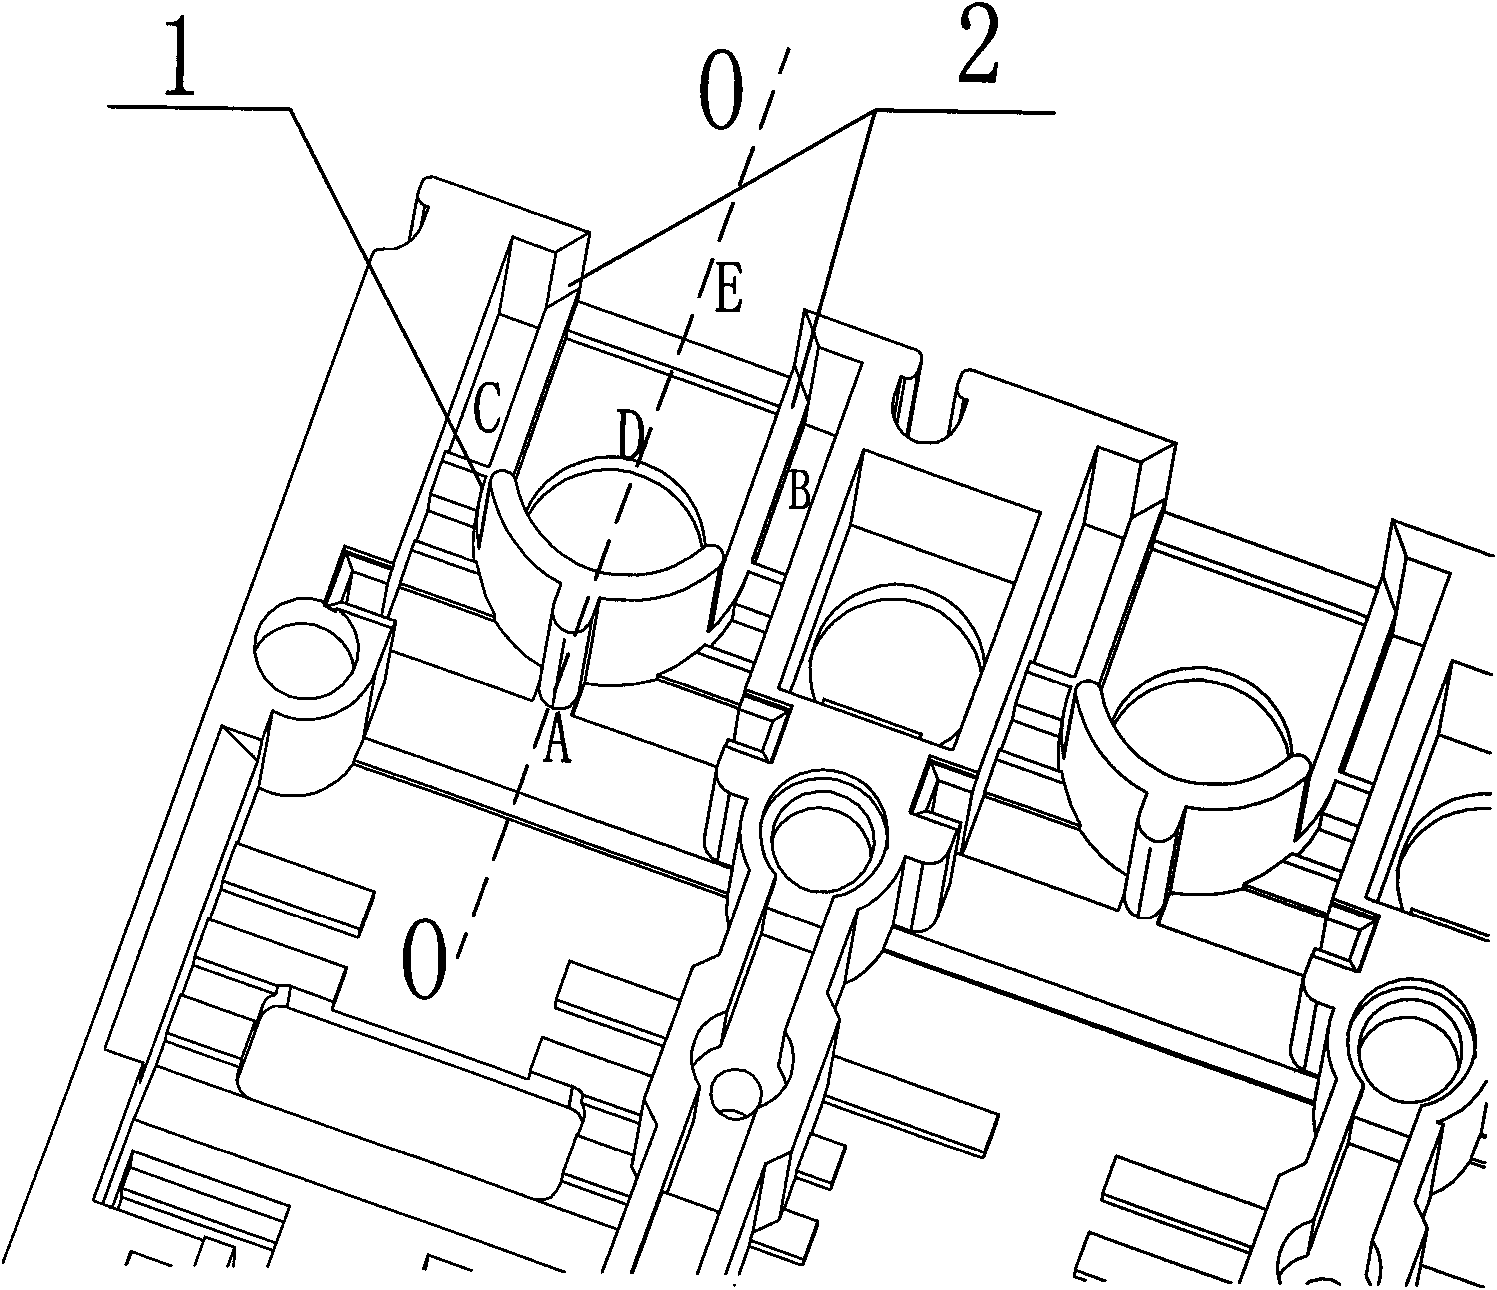 Structure for reducing flashover length of moulded case circuit breaker